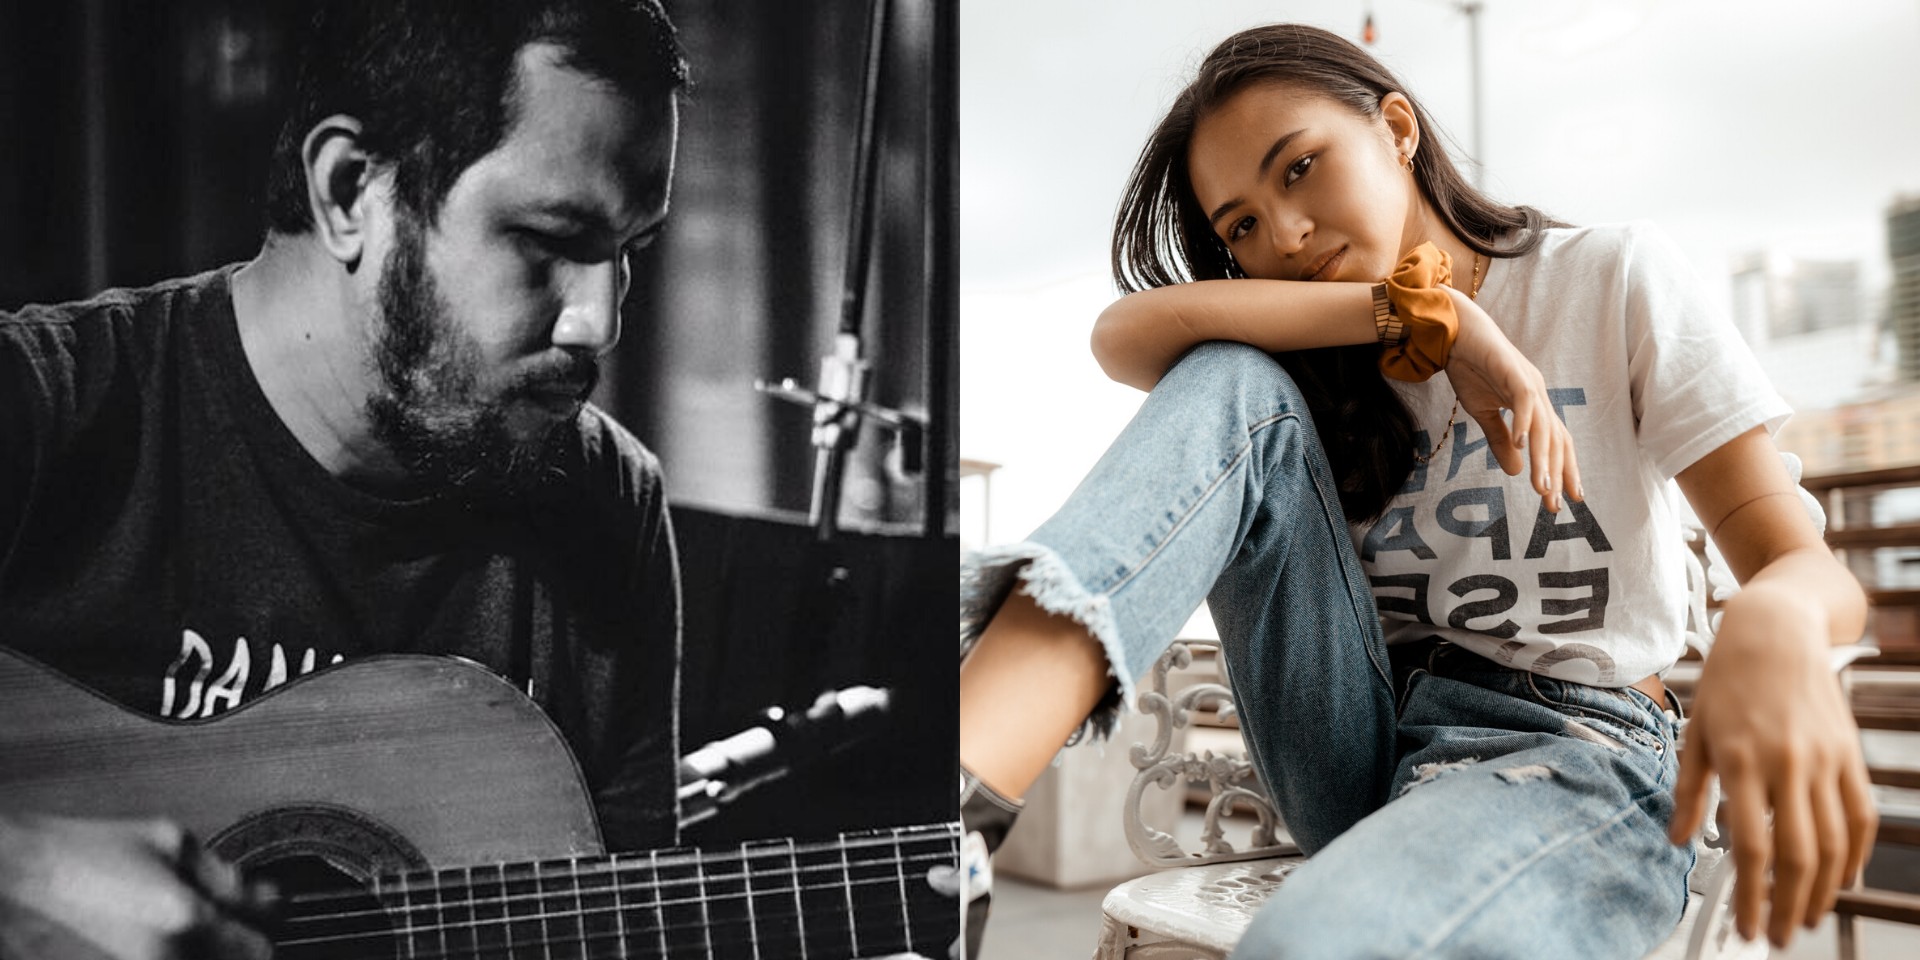 Johnoy Danao and Clara Benin team up for a special Valentine's show this weekend